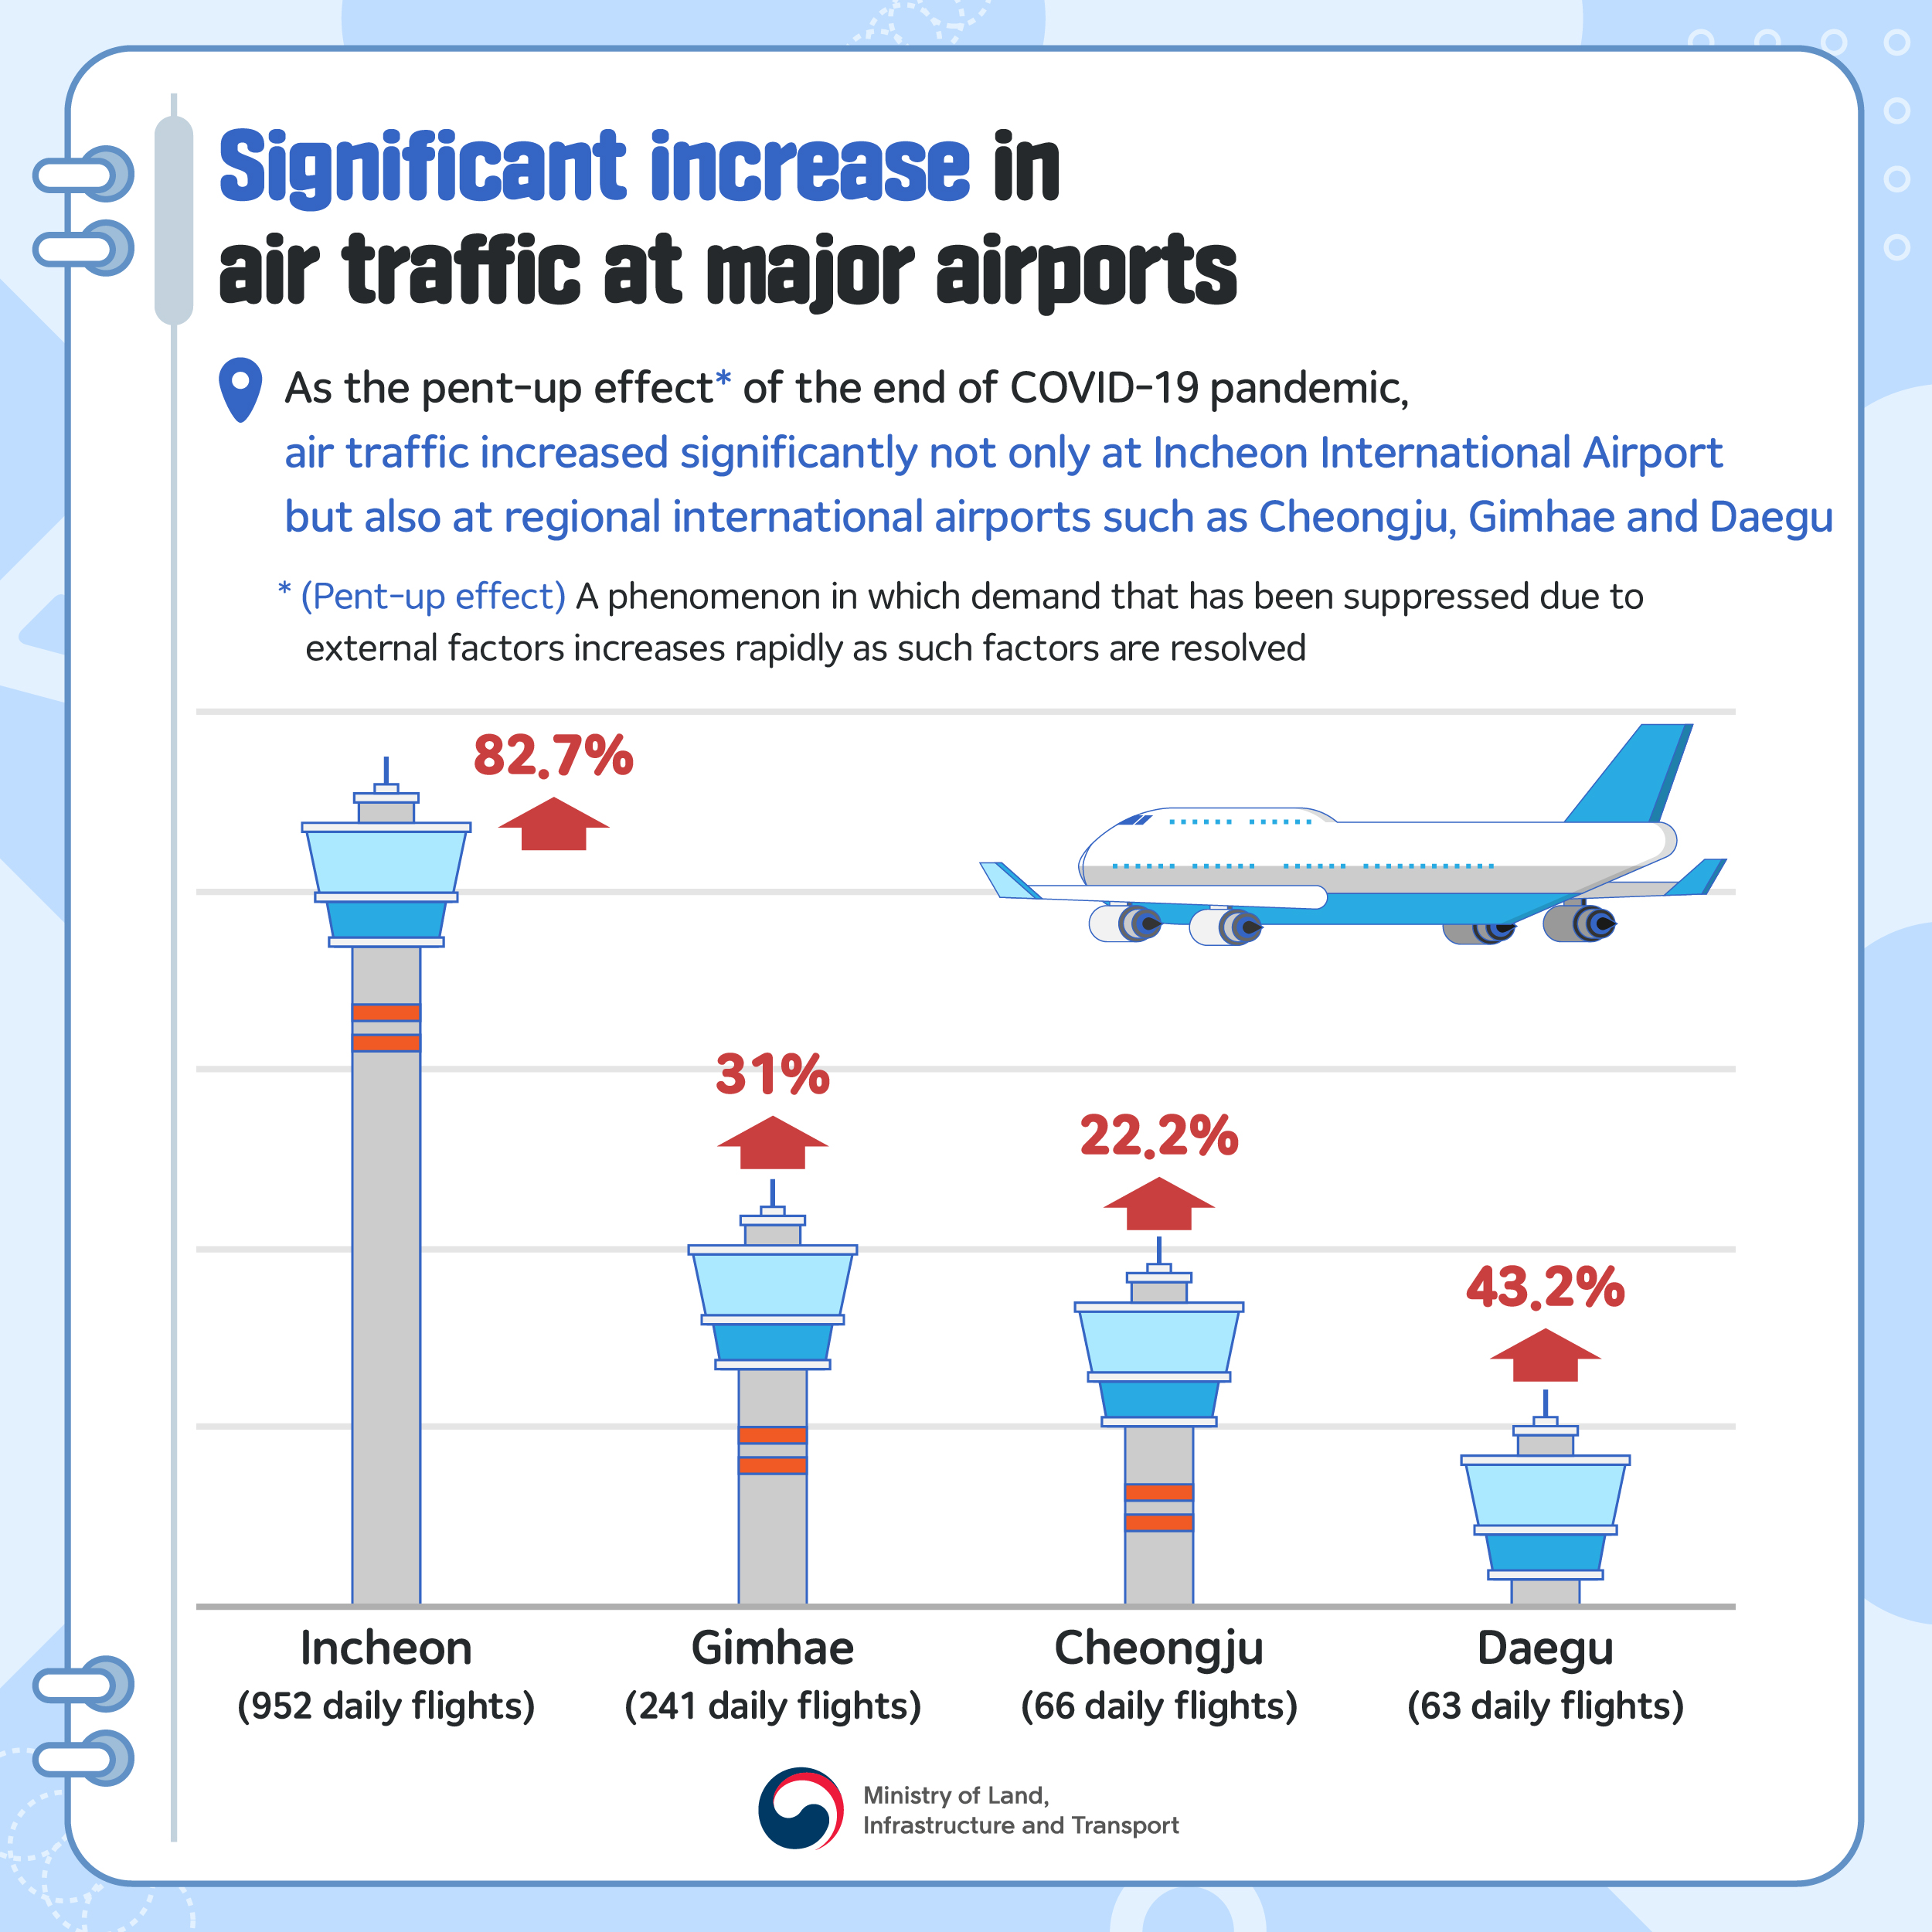 pic 5. Significant increase in air traffic at major airports - As the pent-up effect of the end of COVID-19 pandemicm air traffic increased significantly not only at Incheon International Airport but also at regional international airports such as Cheongju, Gimhaae and Daegu